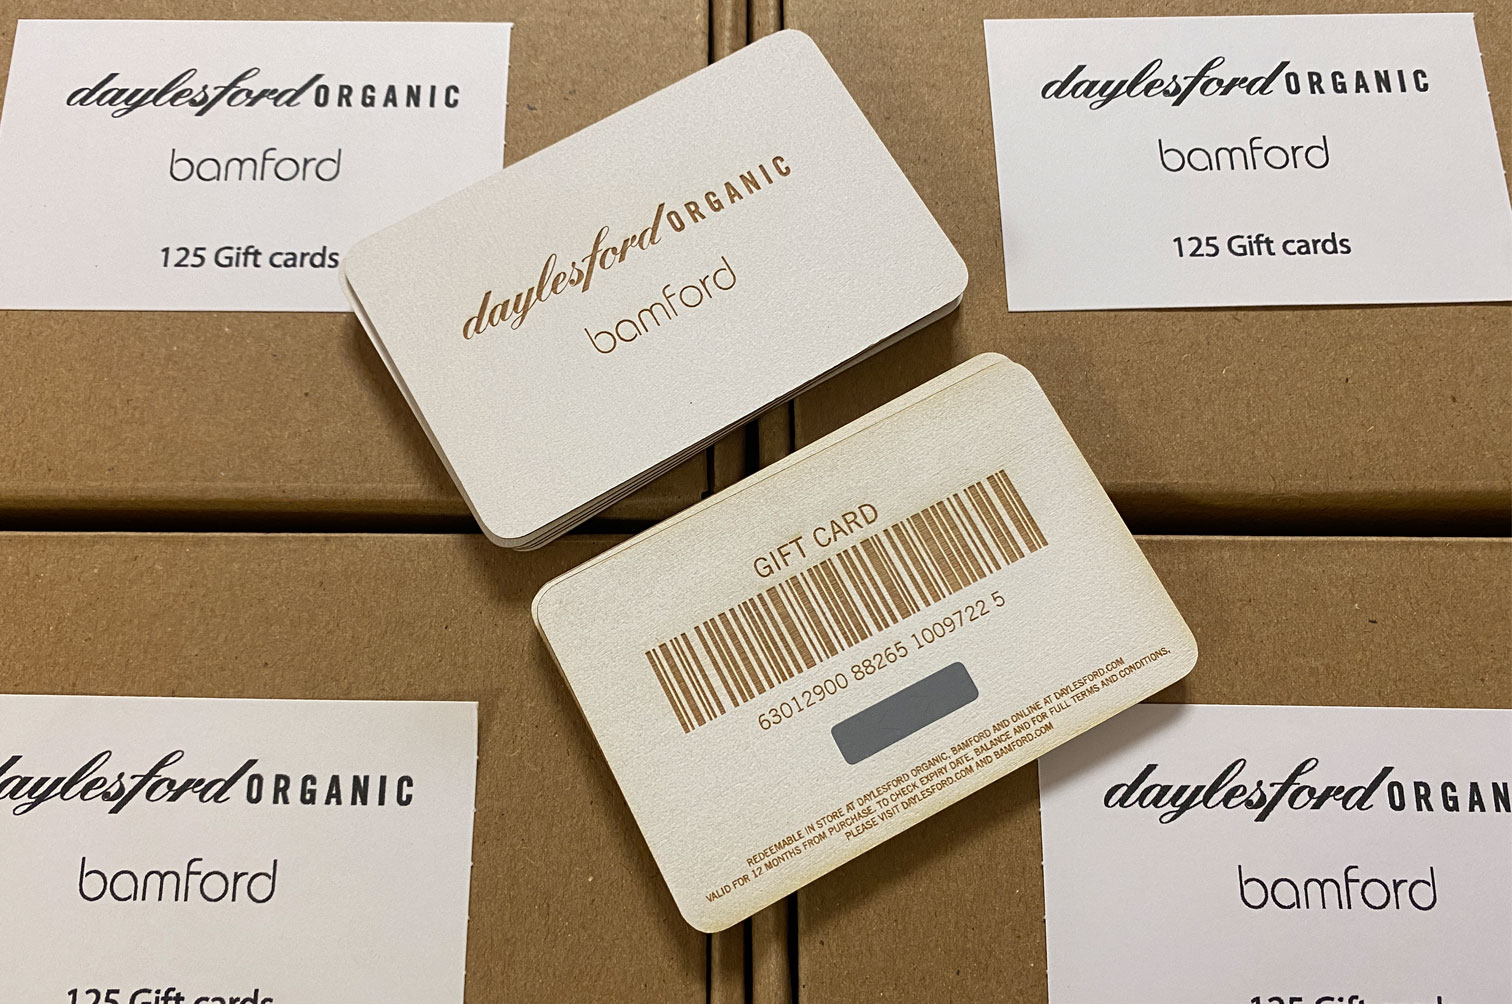 Eco friendly wood gift cards for Daylesford Organic and Bamford.